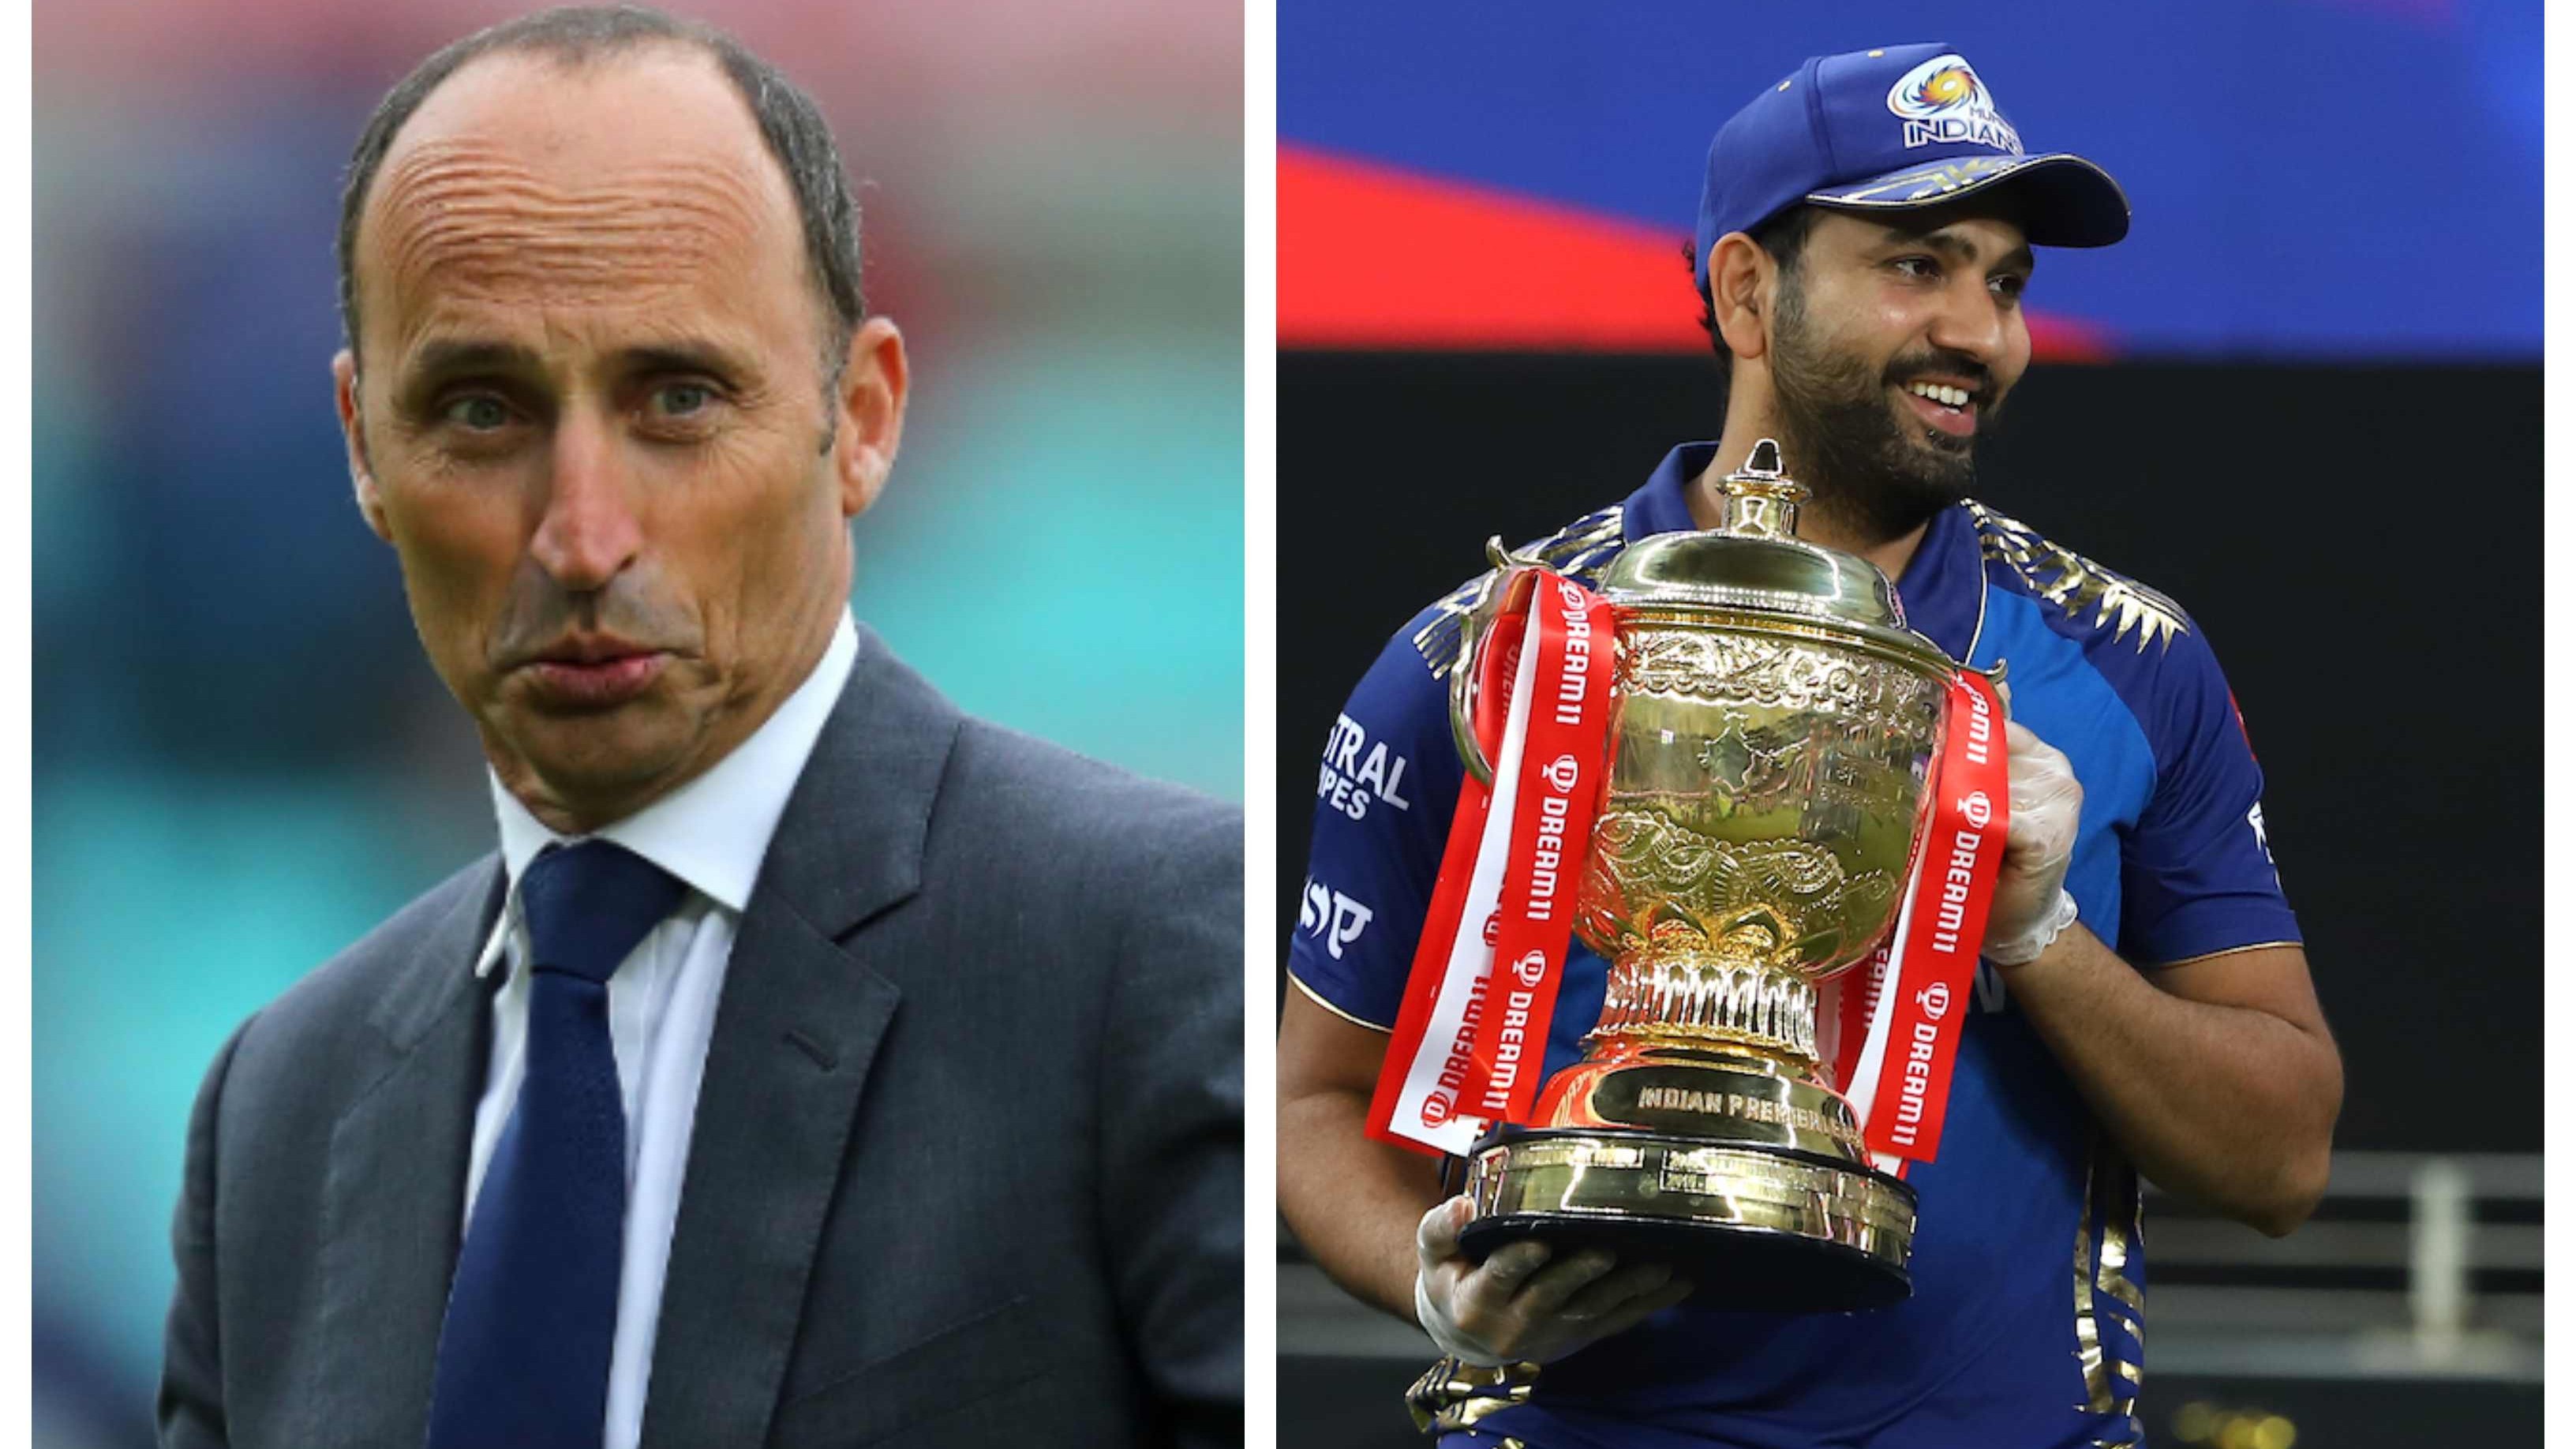 Nasser Hussain hails Rohit Sharma as one of the great white ball players, calls him a calm captain